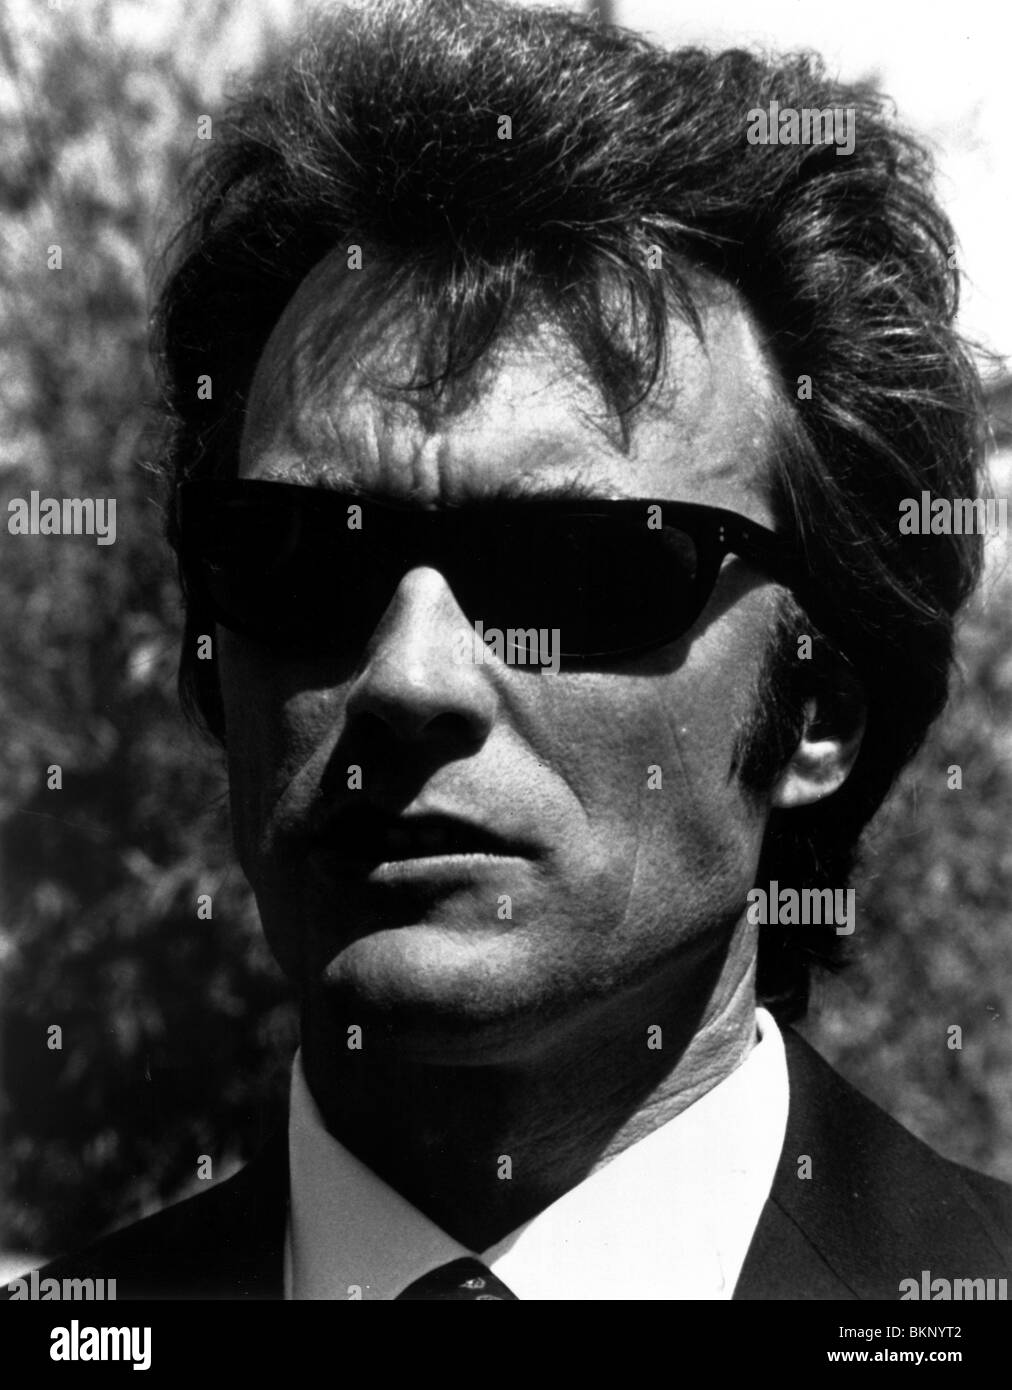 DIRTY HARRY (1971) CLINT EASTWOOD DTH 021P Stockfoto